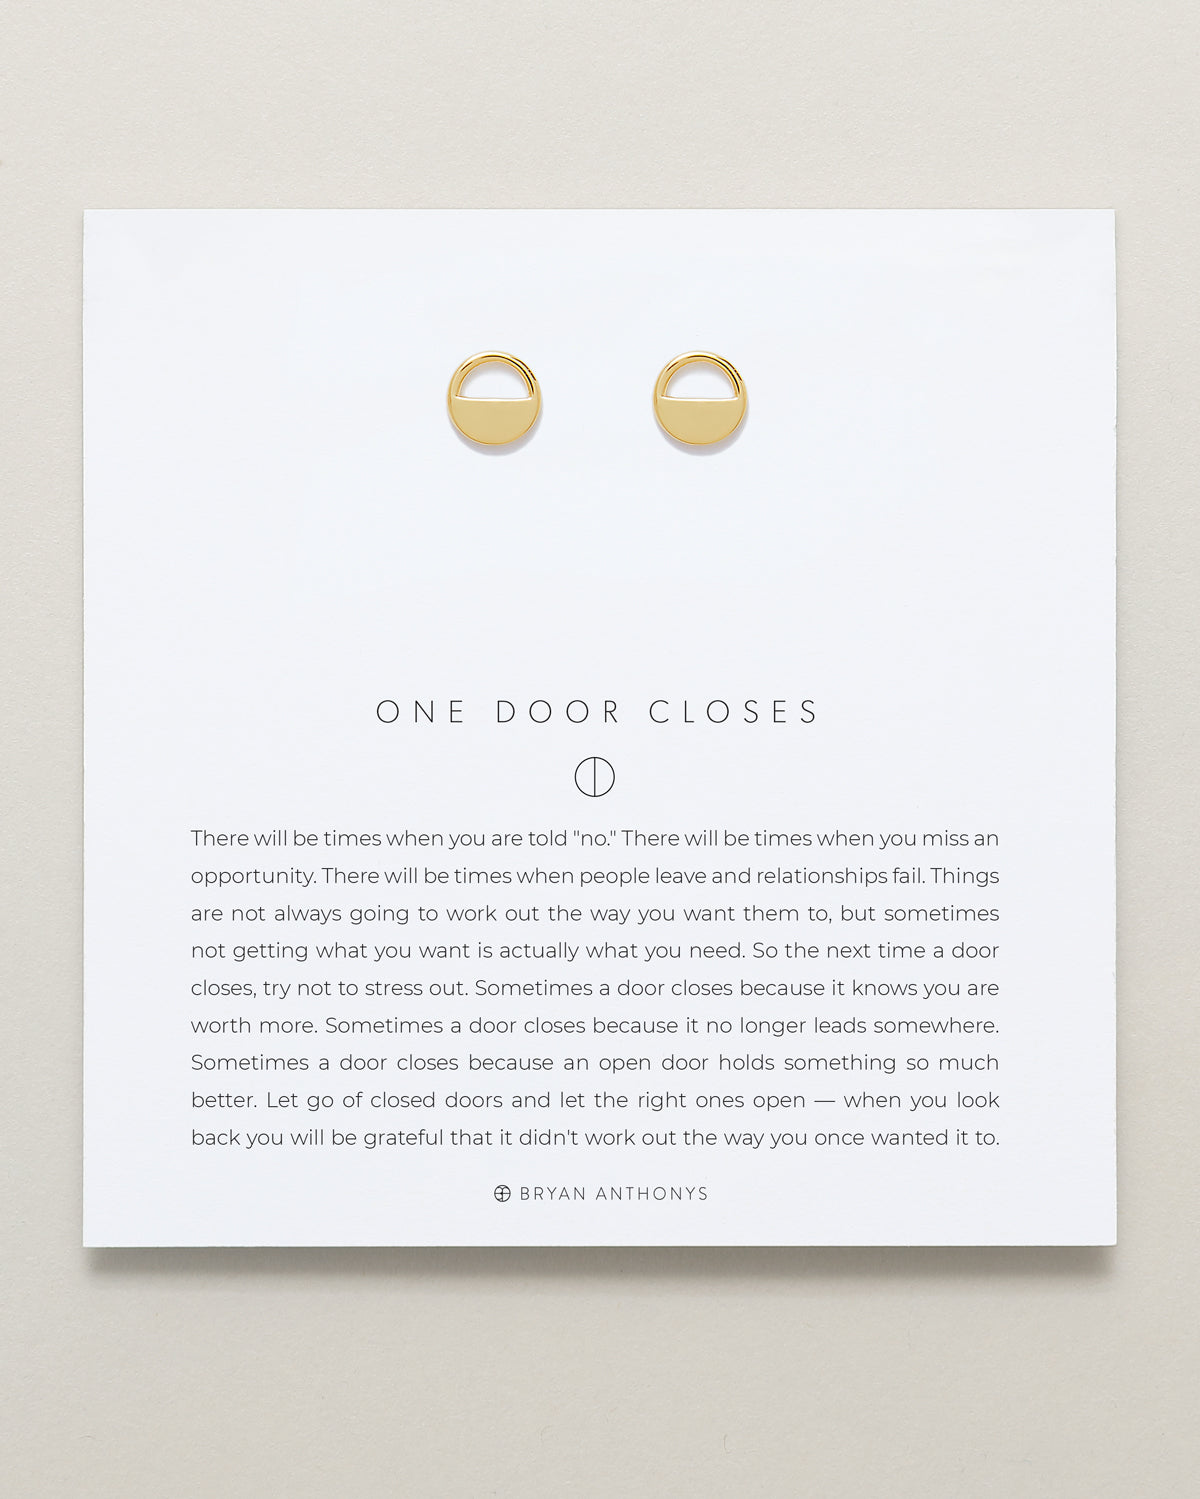 Bryan Anthonys One Door Closes Gold Earring On Card